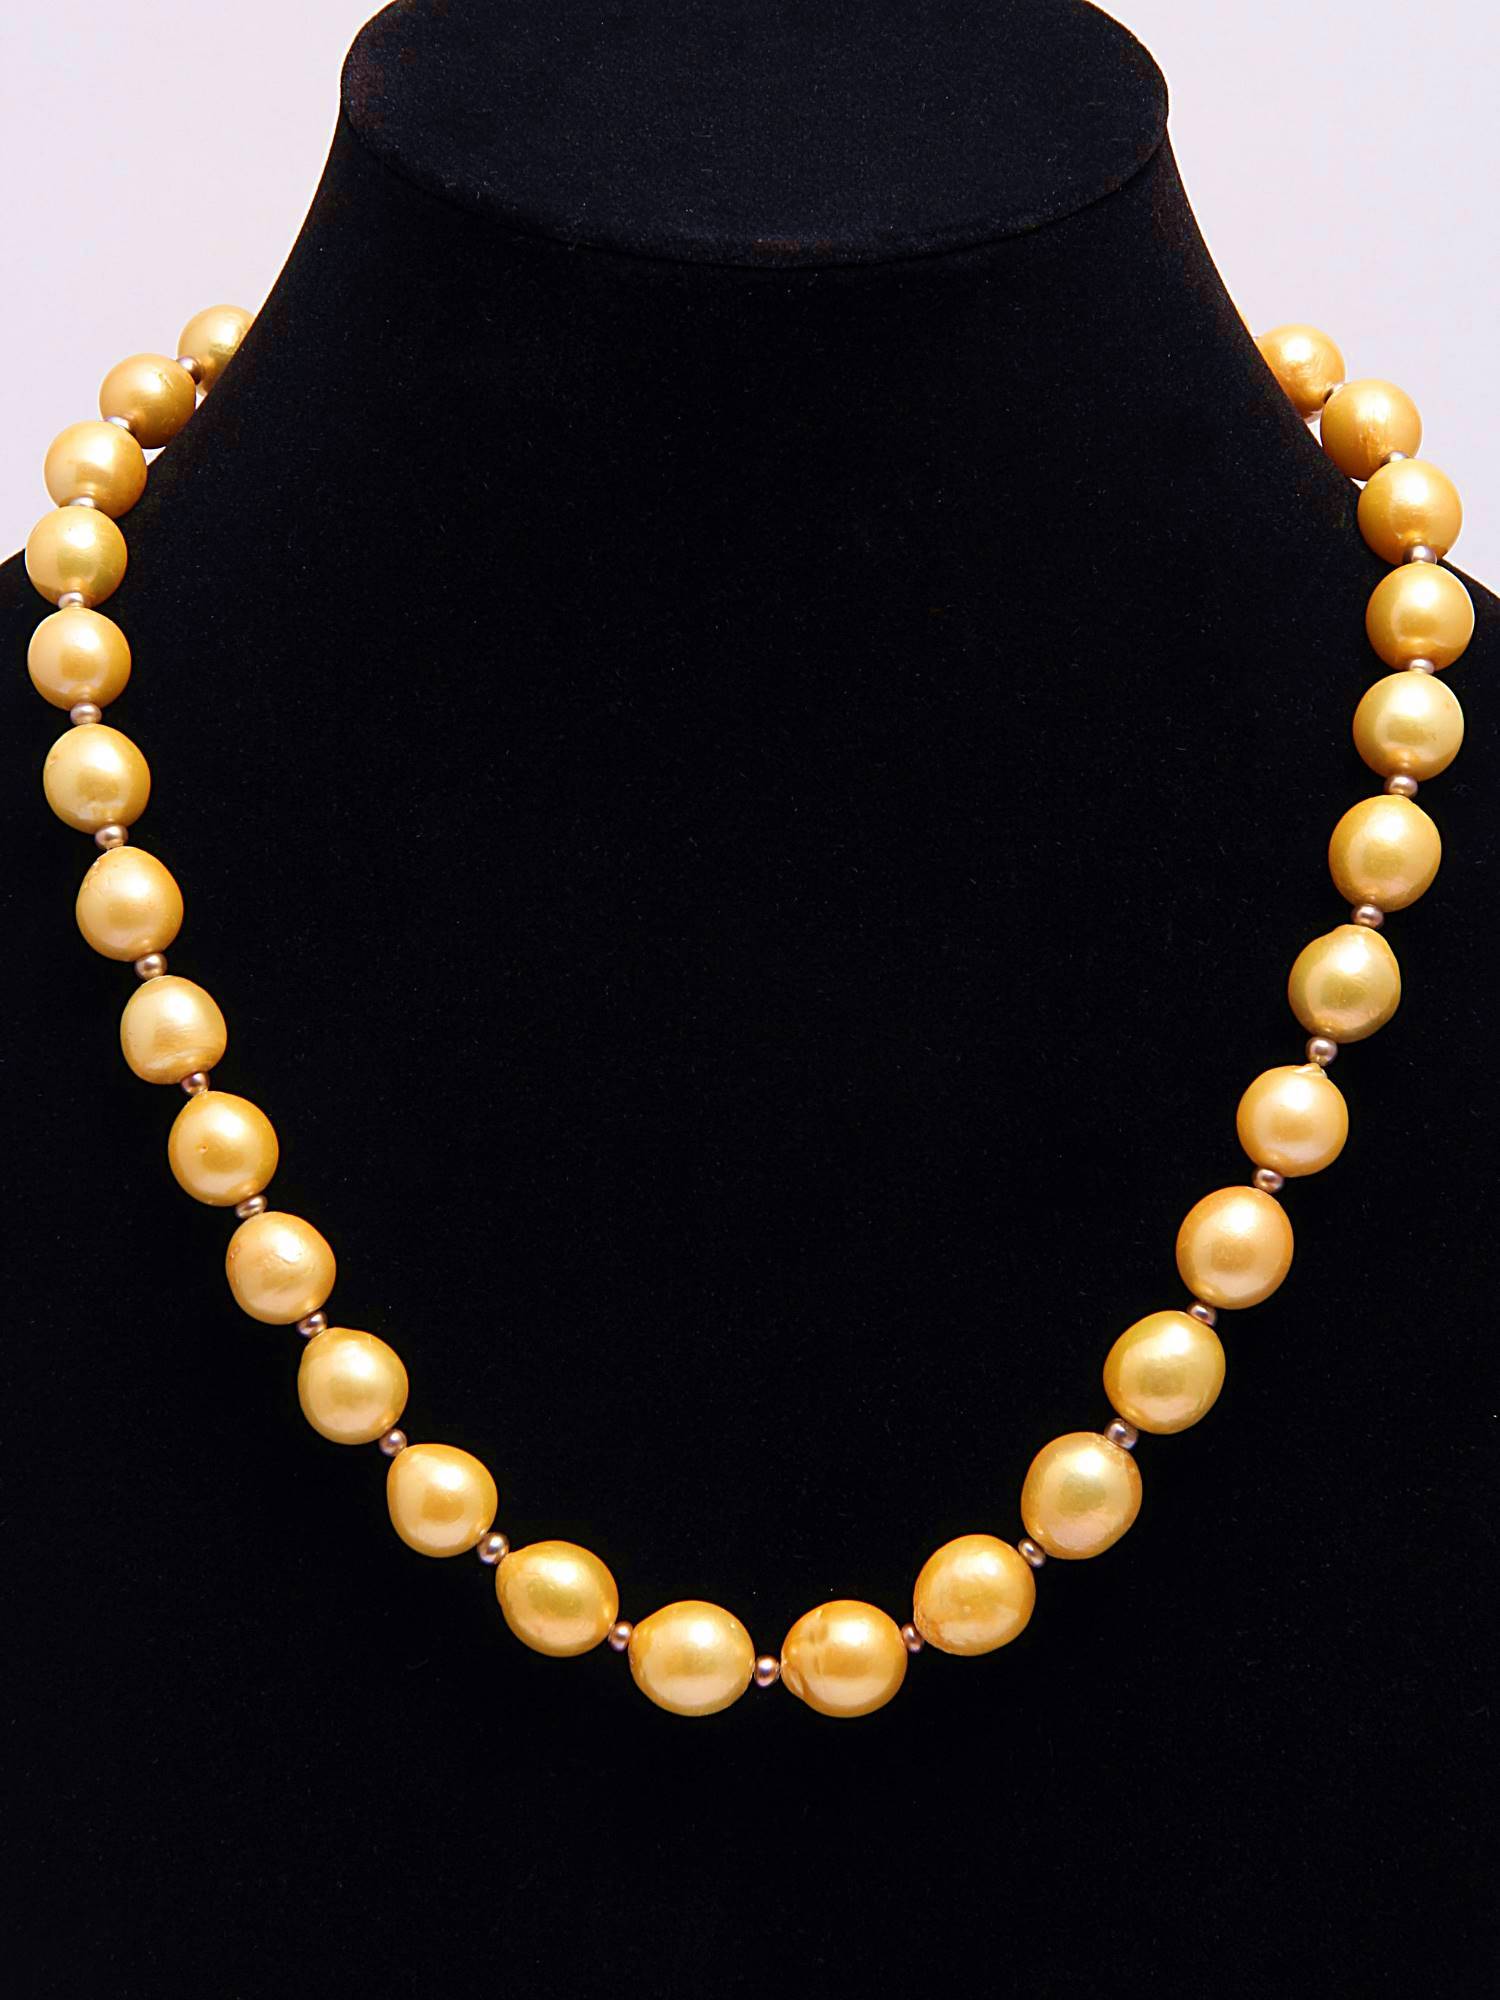 Golden Yellow(12-10MM) Semi-Baroque Shaped & 4MM Grey button Freshwater Pearls Necklace Set with 92.5 Sterling Silver Clasp, 450 carats - (F1018)